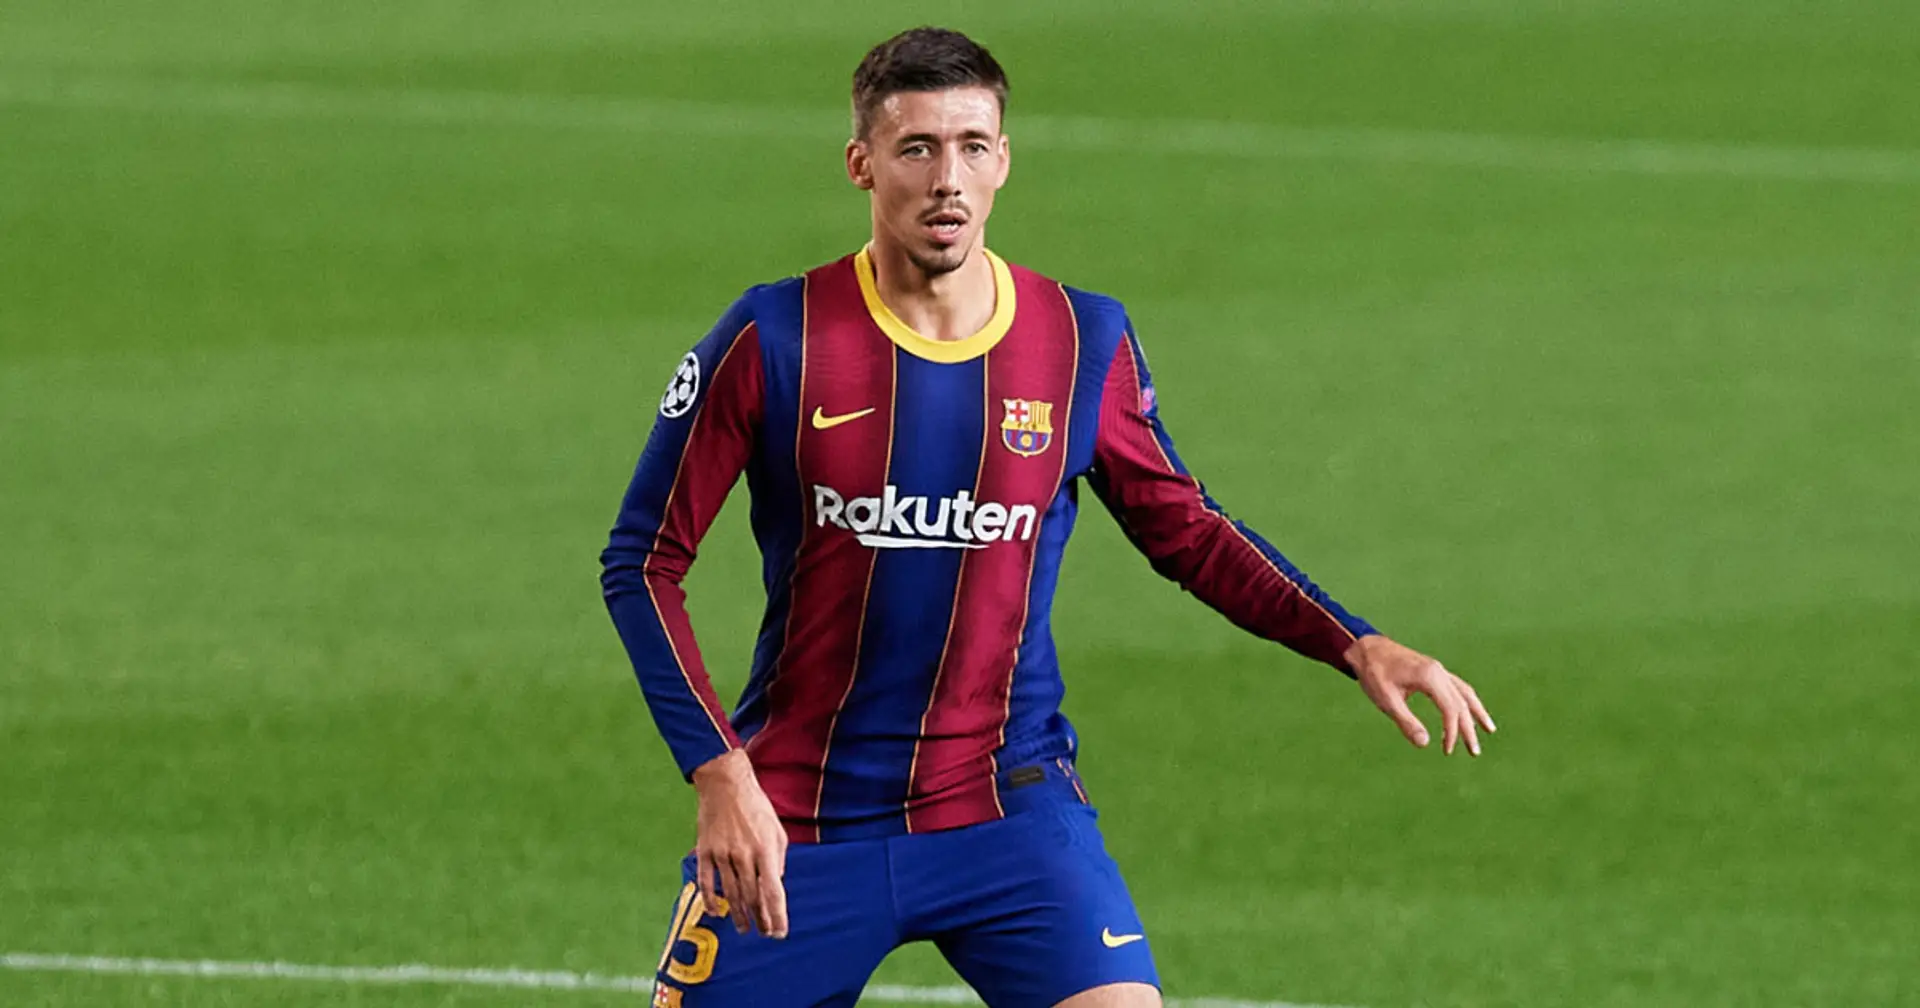 Bad luck or poor form? Lenglet completes 'mistakes poker' with Getafe own goal